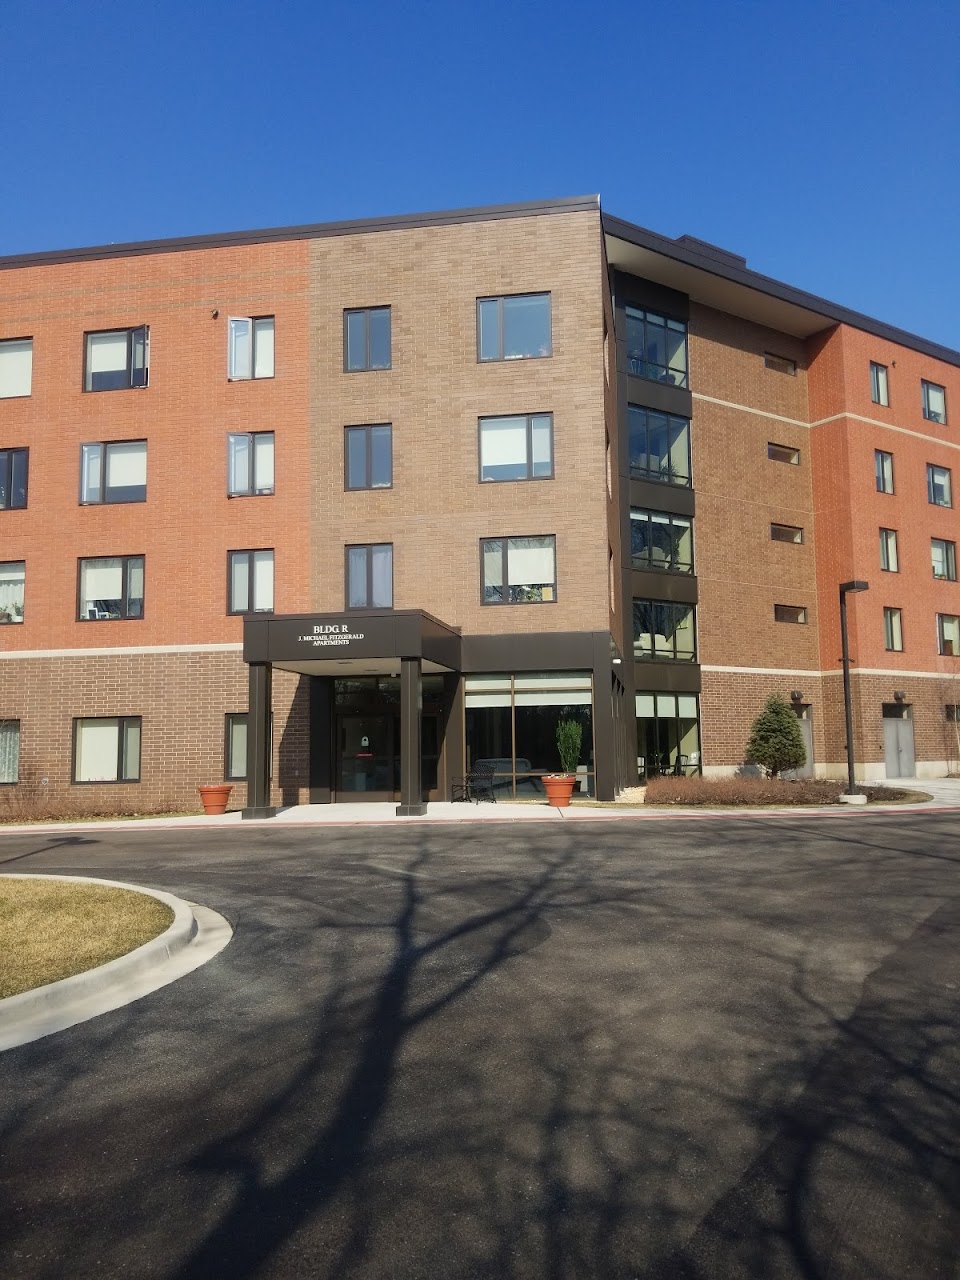 Photo of J. MICHAEL FITZGERALD APARTMENTS. Affordable housing located at 5801 NORTH PULASKI ROAD CHICAGO, IL 60646